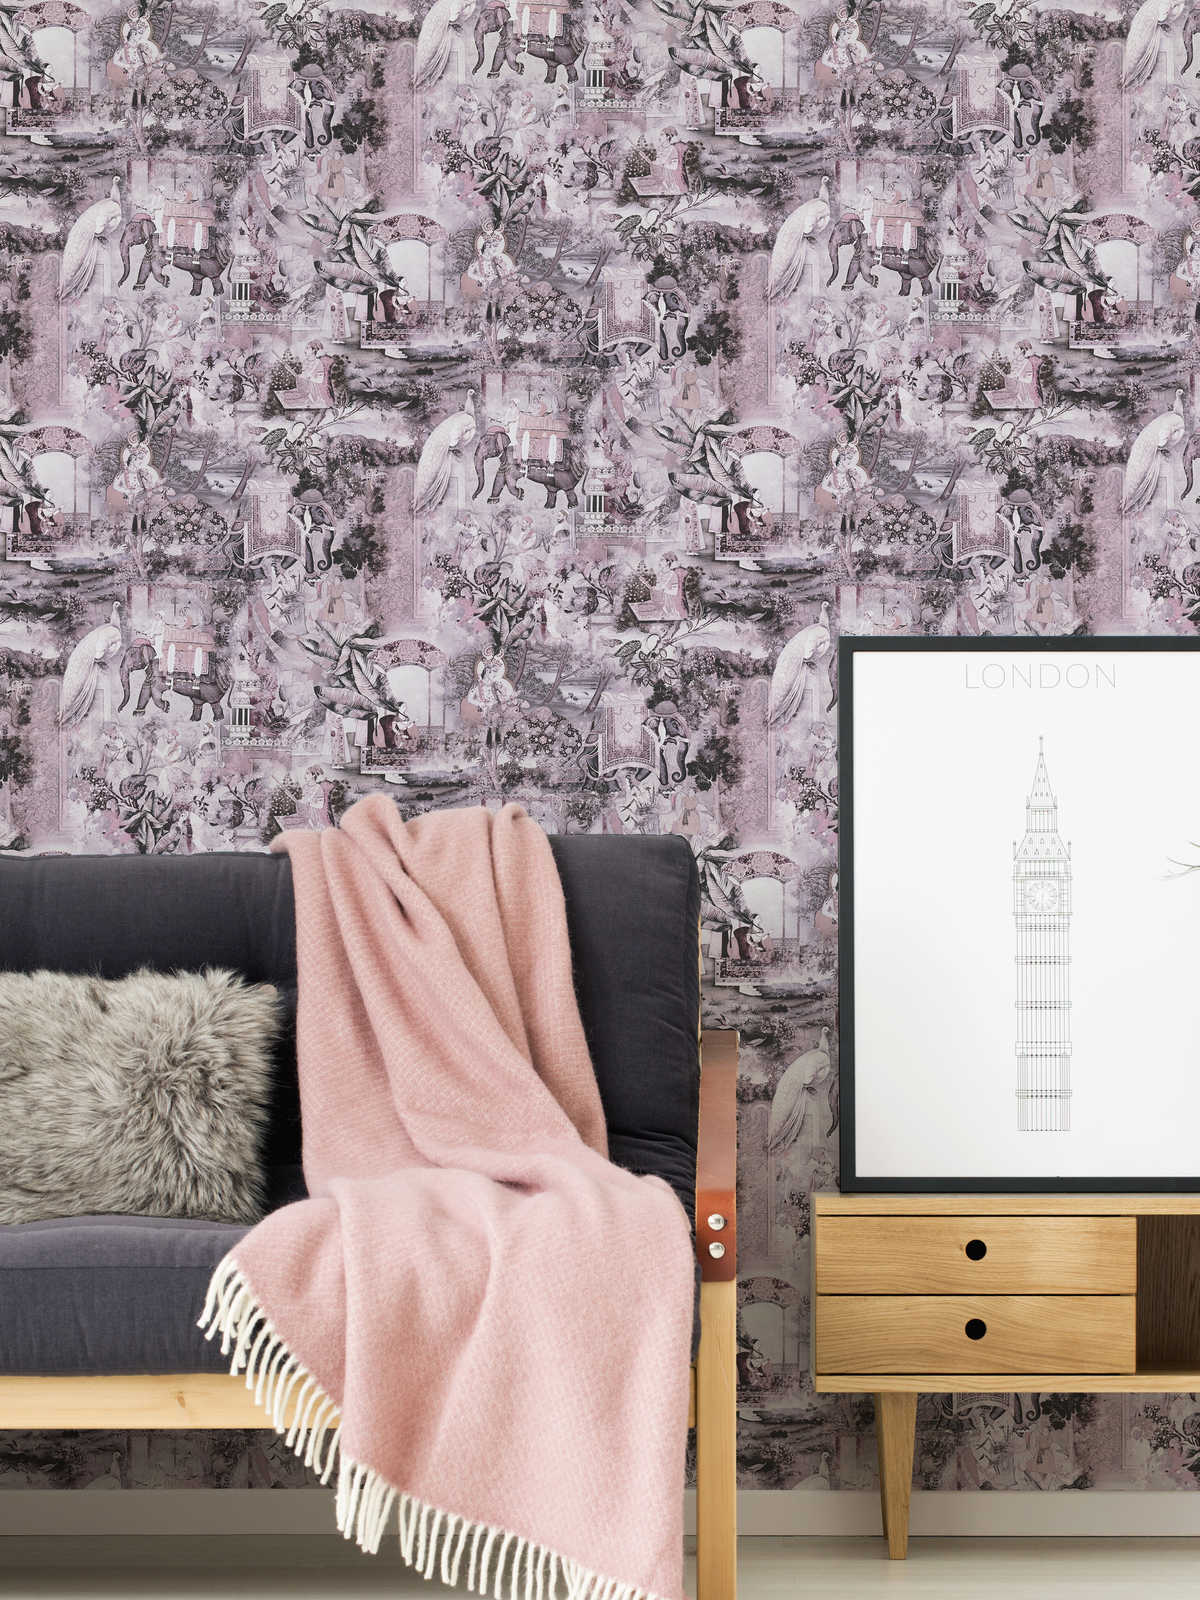             Non-woven wallpaper India with elephant & vintage pattern - pink, grey
        